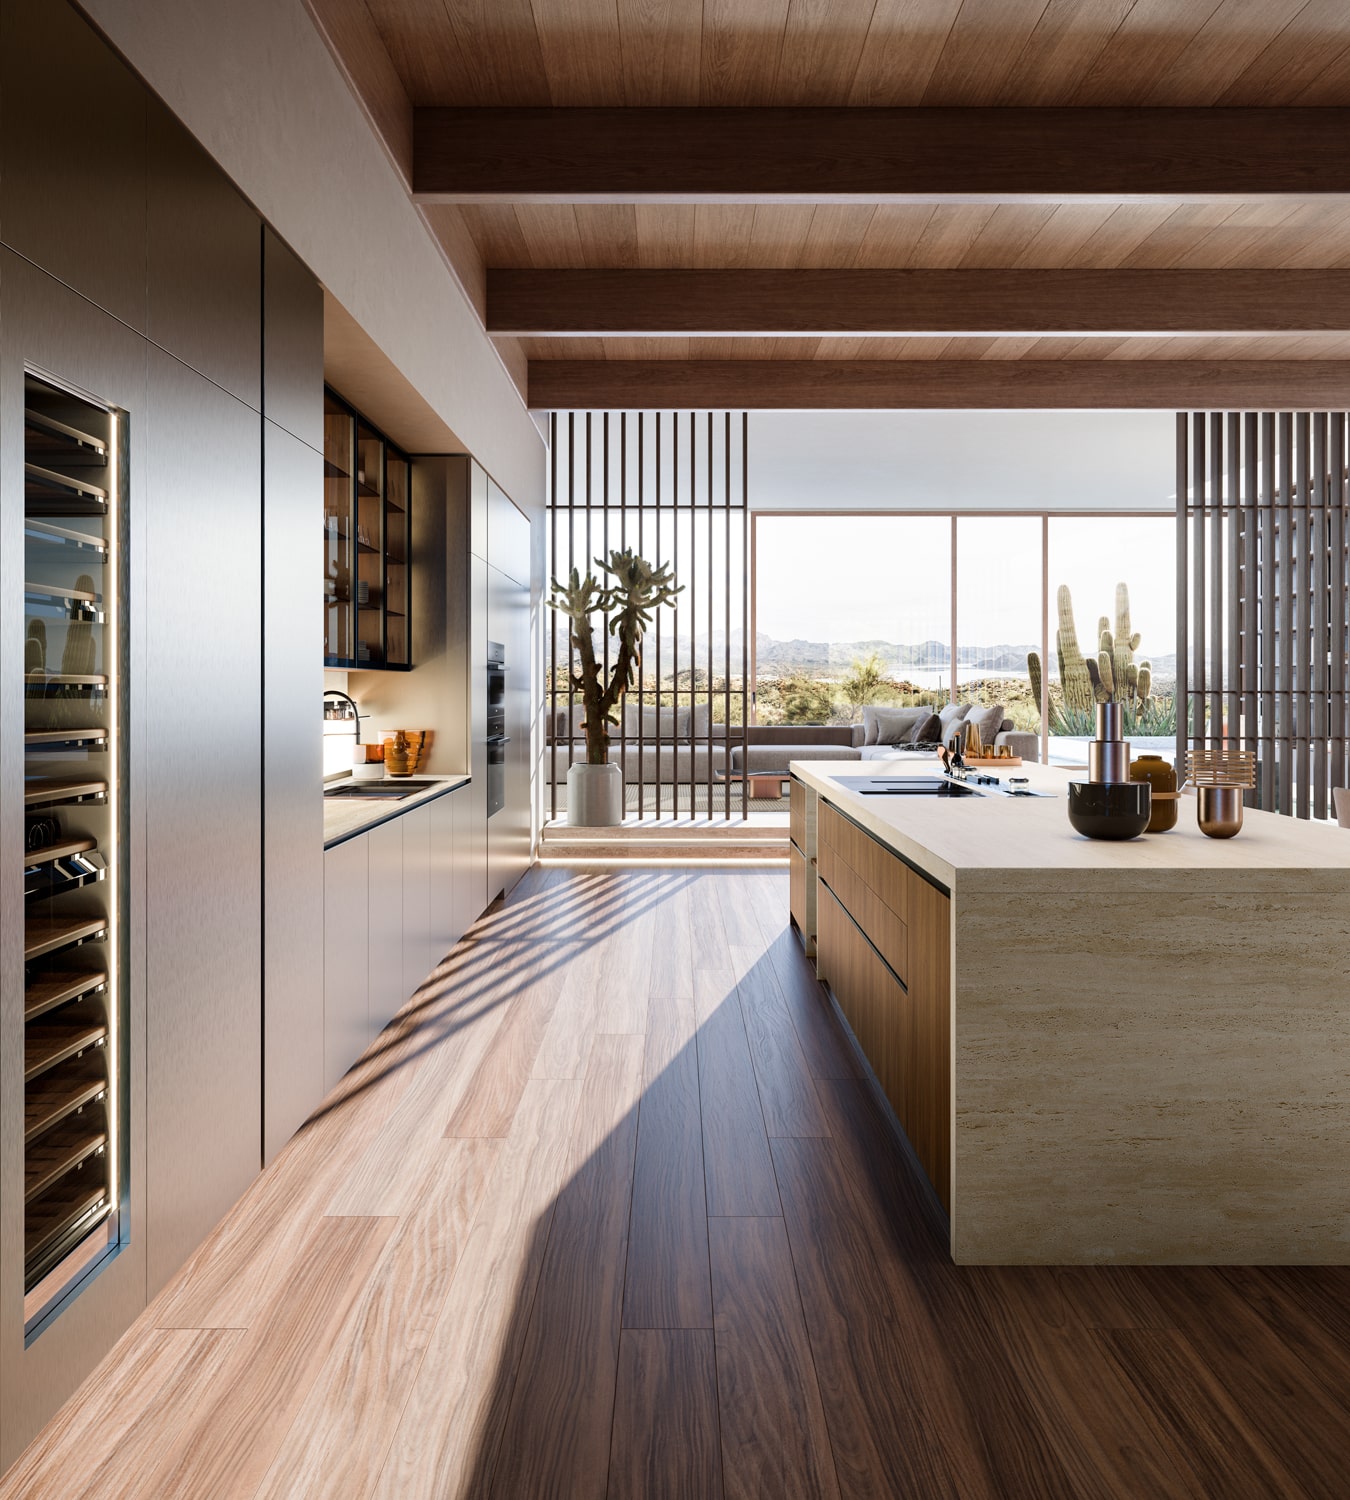 A customizable channel integrated within the island’s counter in front of the stovetop offers a storage area for knives, cooking utensils, spices, wine bottles, and more.